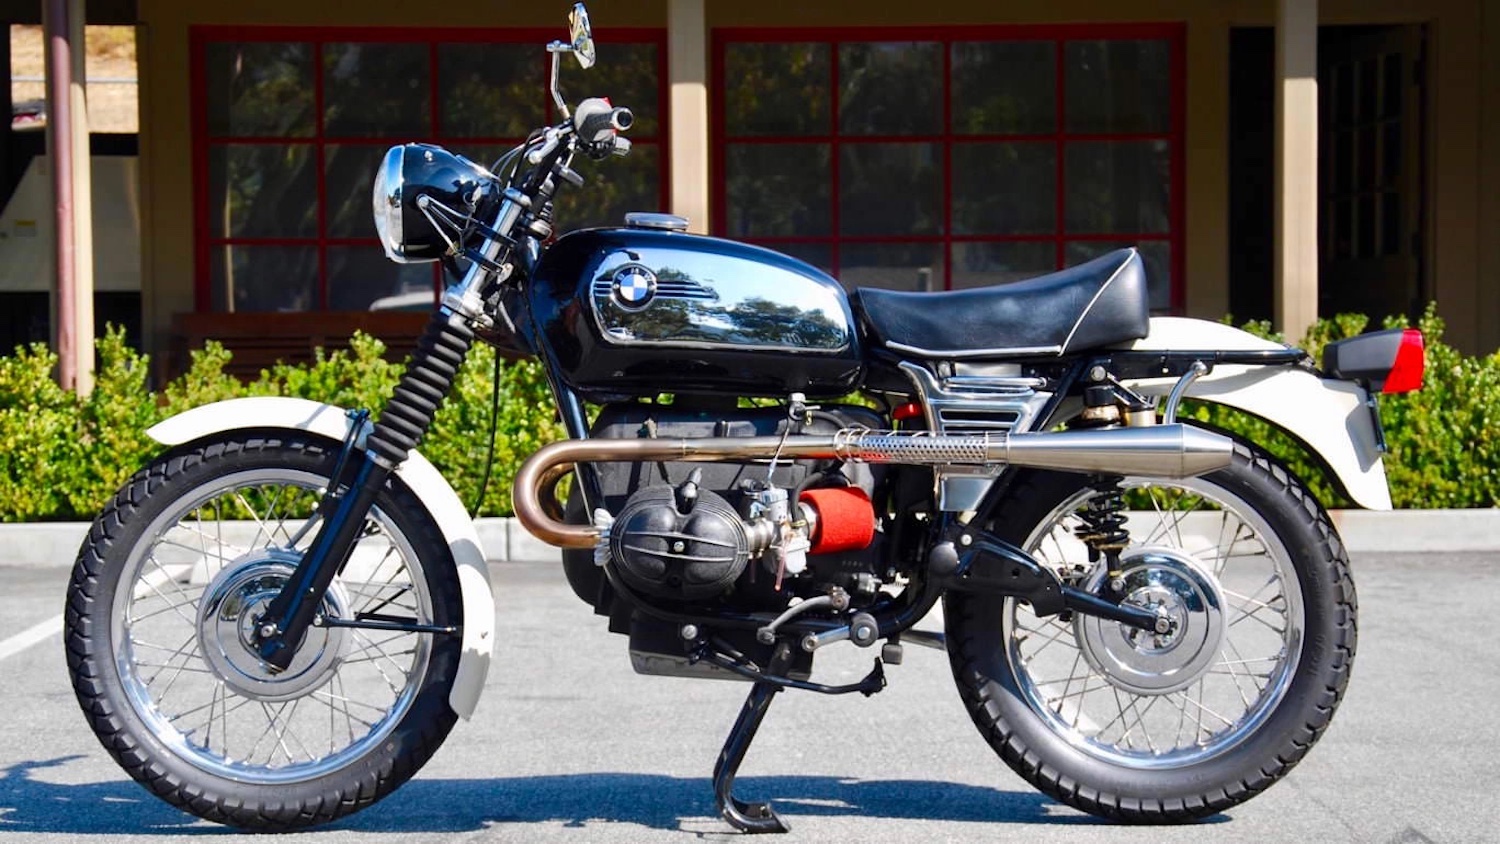 1972 BMW R75/5 "scrambler" in a parking lot was the basis for the BMW R80 G/S